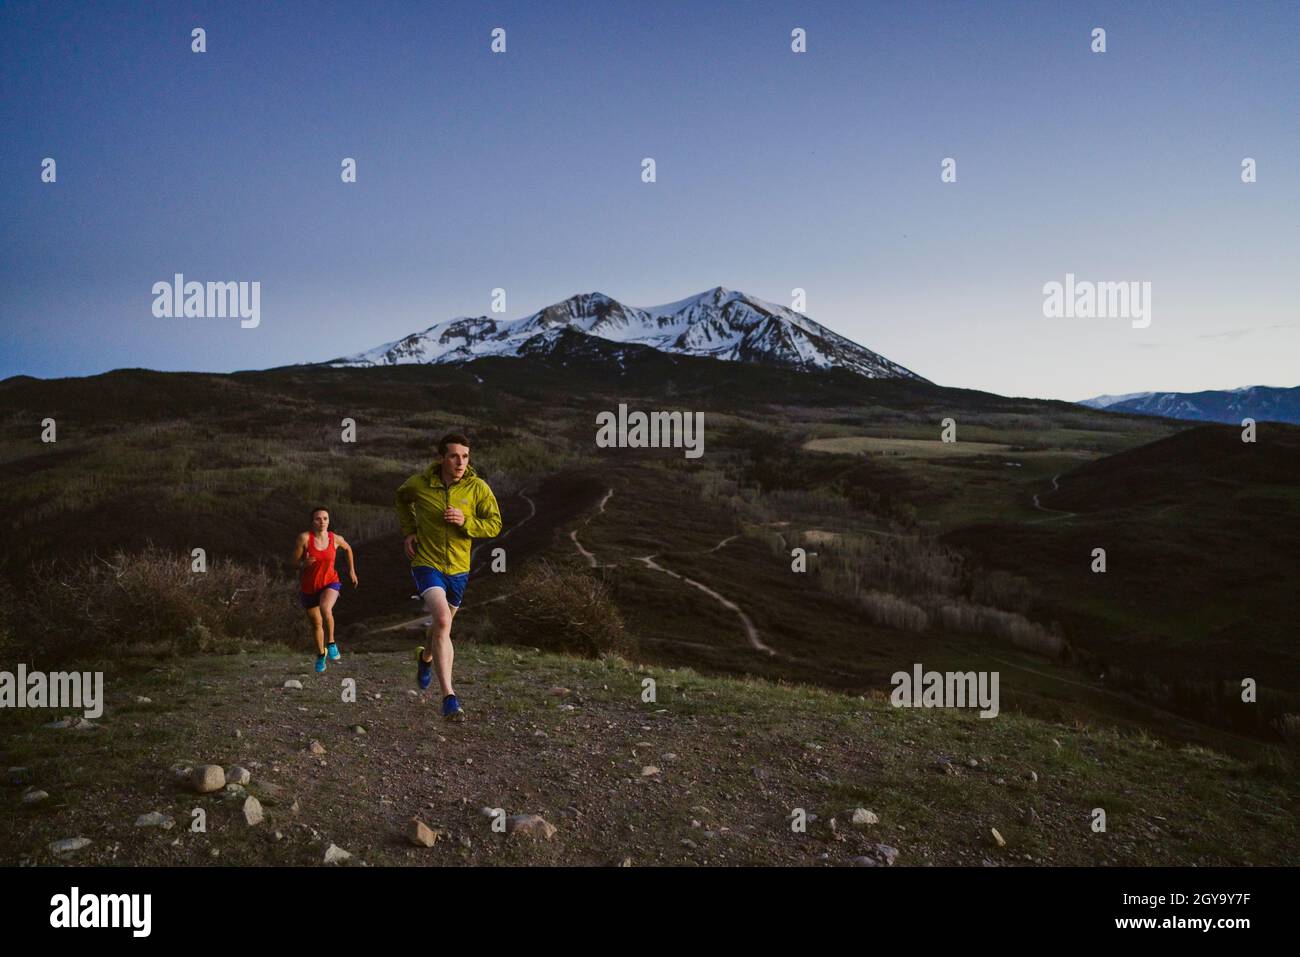 A man and woman trail run at dawn with mountains in the distance Stock Photo